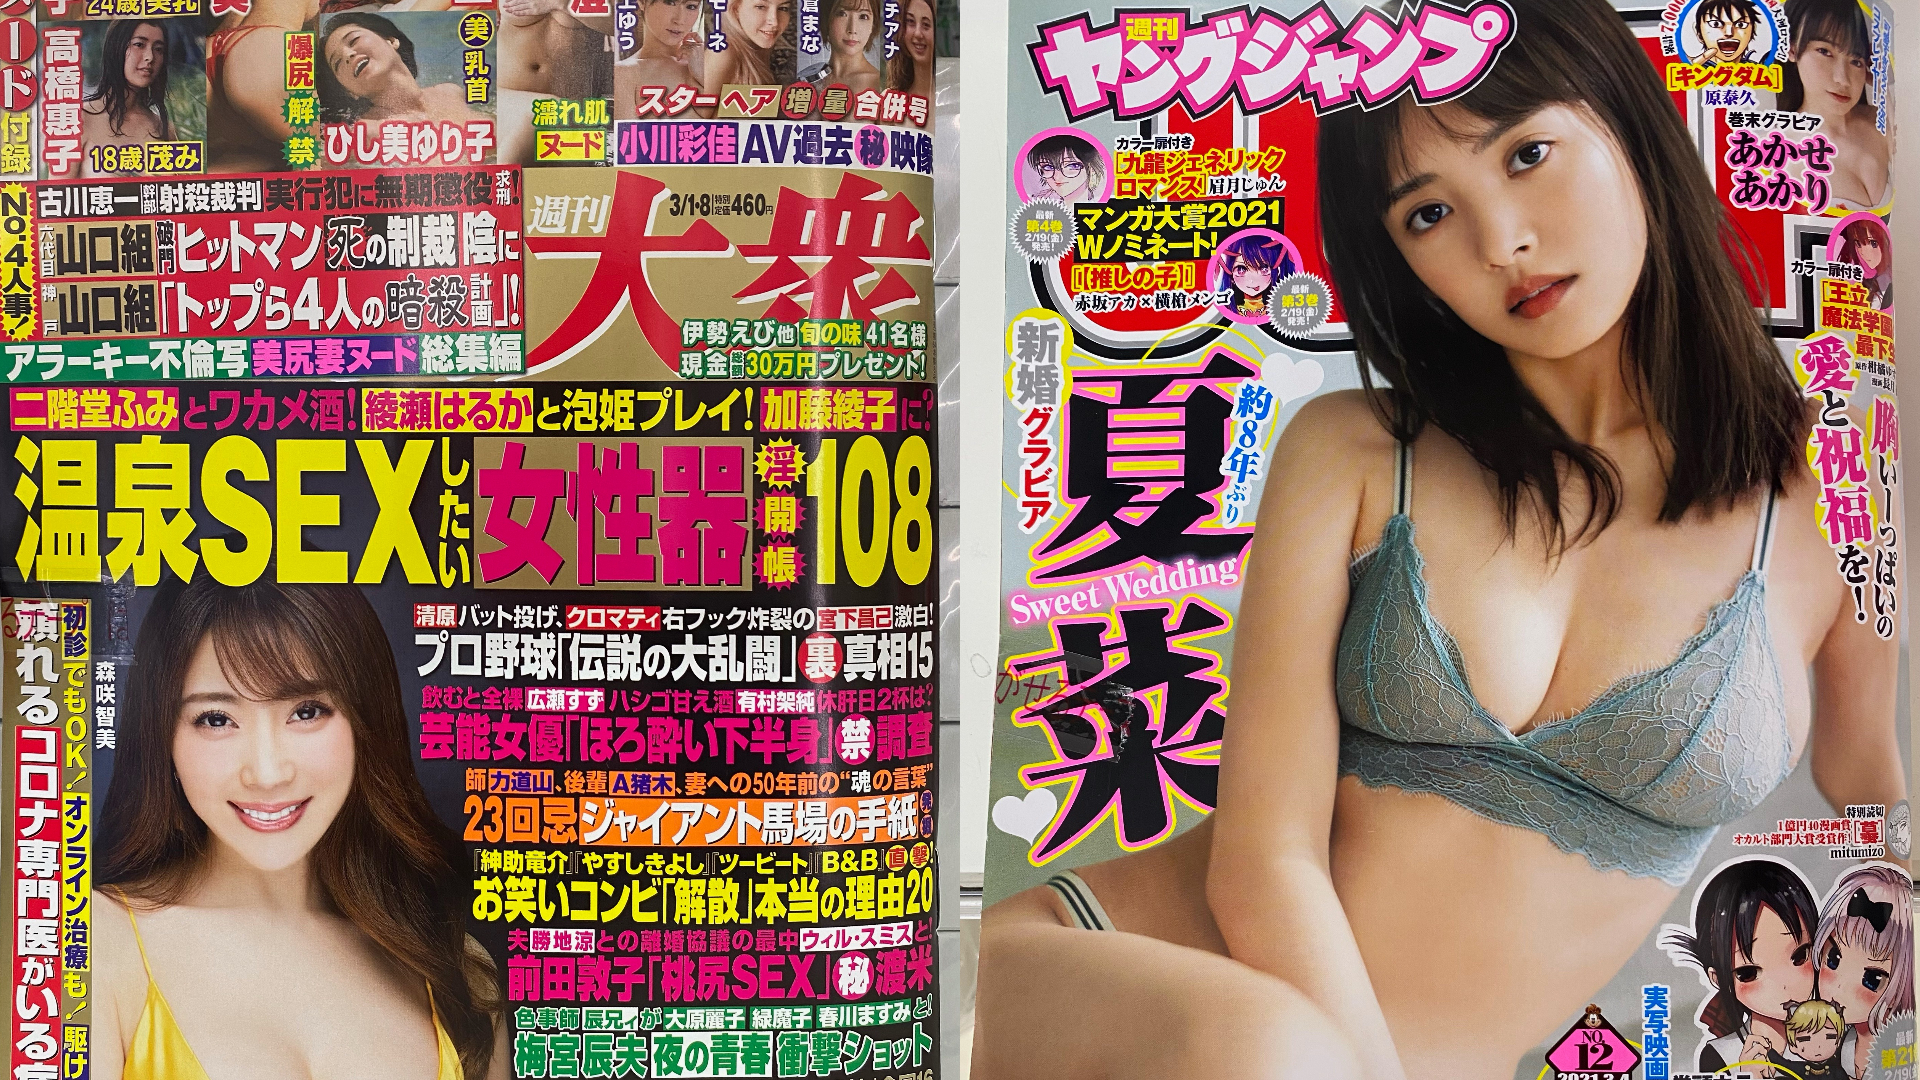 Banned Japanese Porn - Who Buys Porn Magazines Anymore? We Asked the Editor of One.